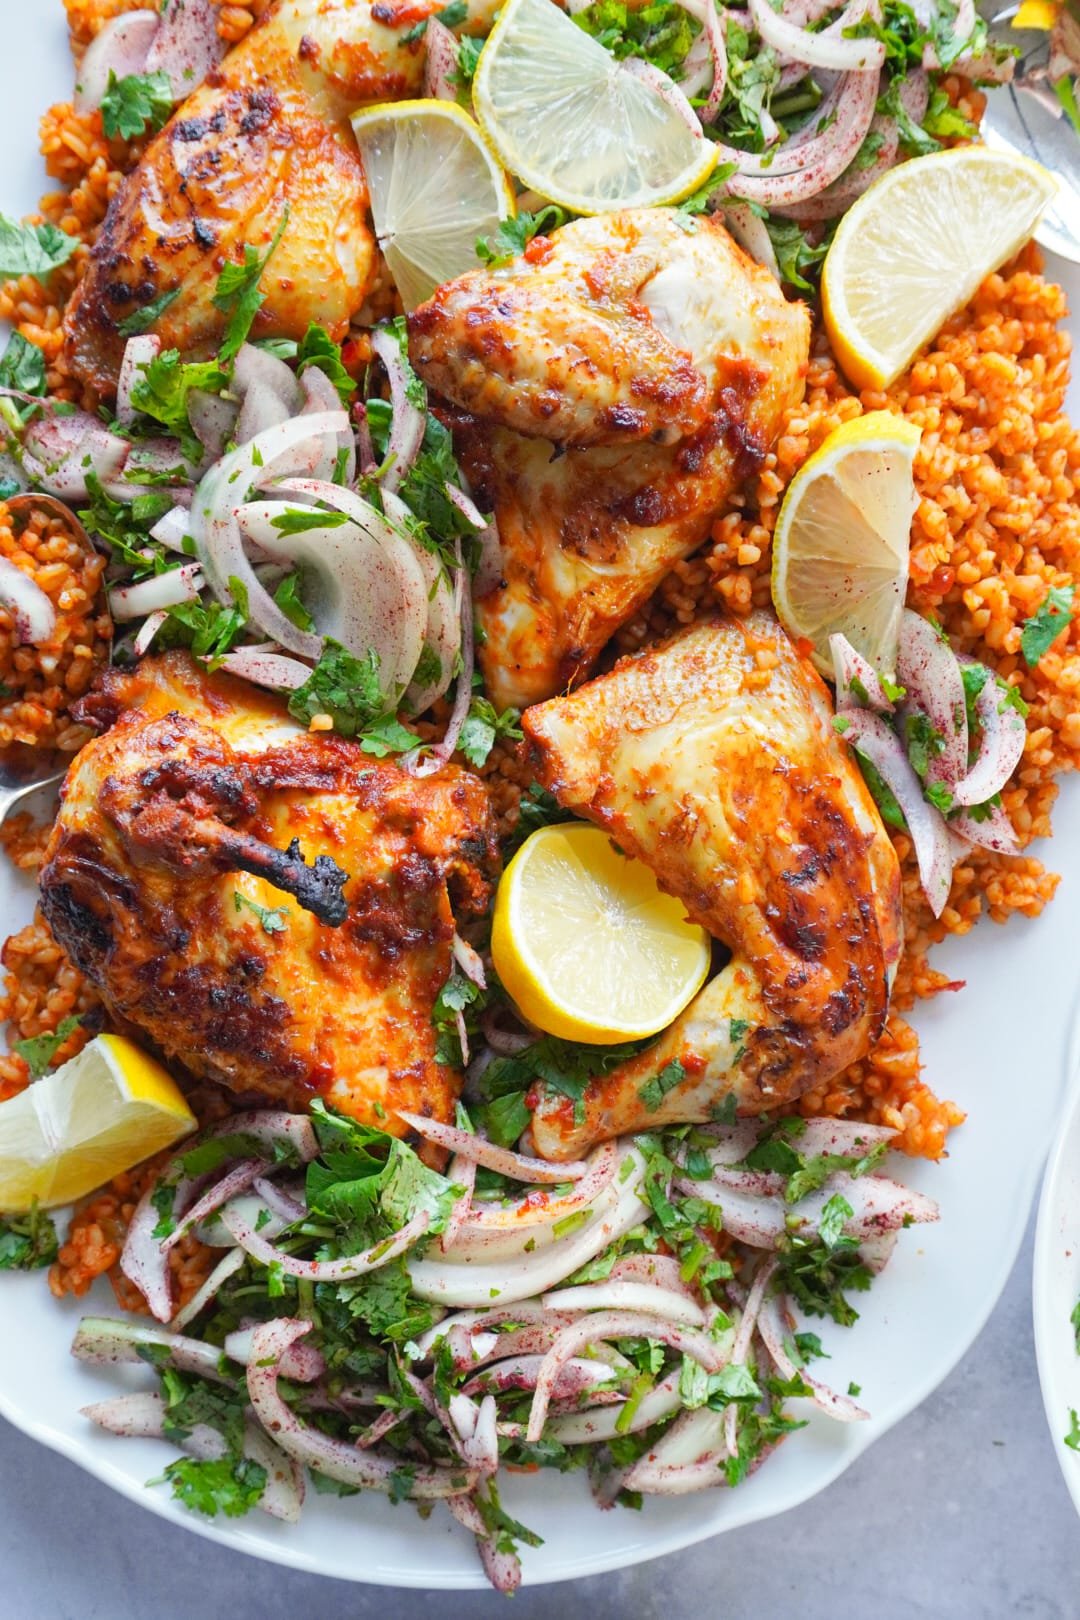 Assemble your dish together on a serving plate, the bulgur, the chicken pieces and the salad.